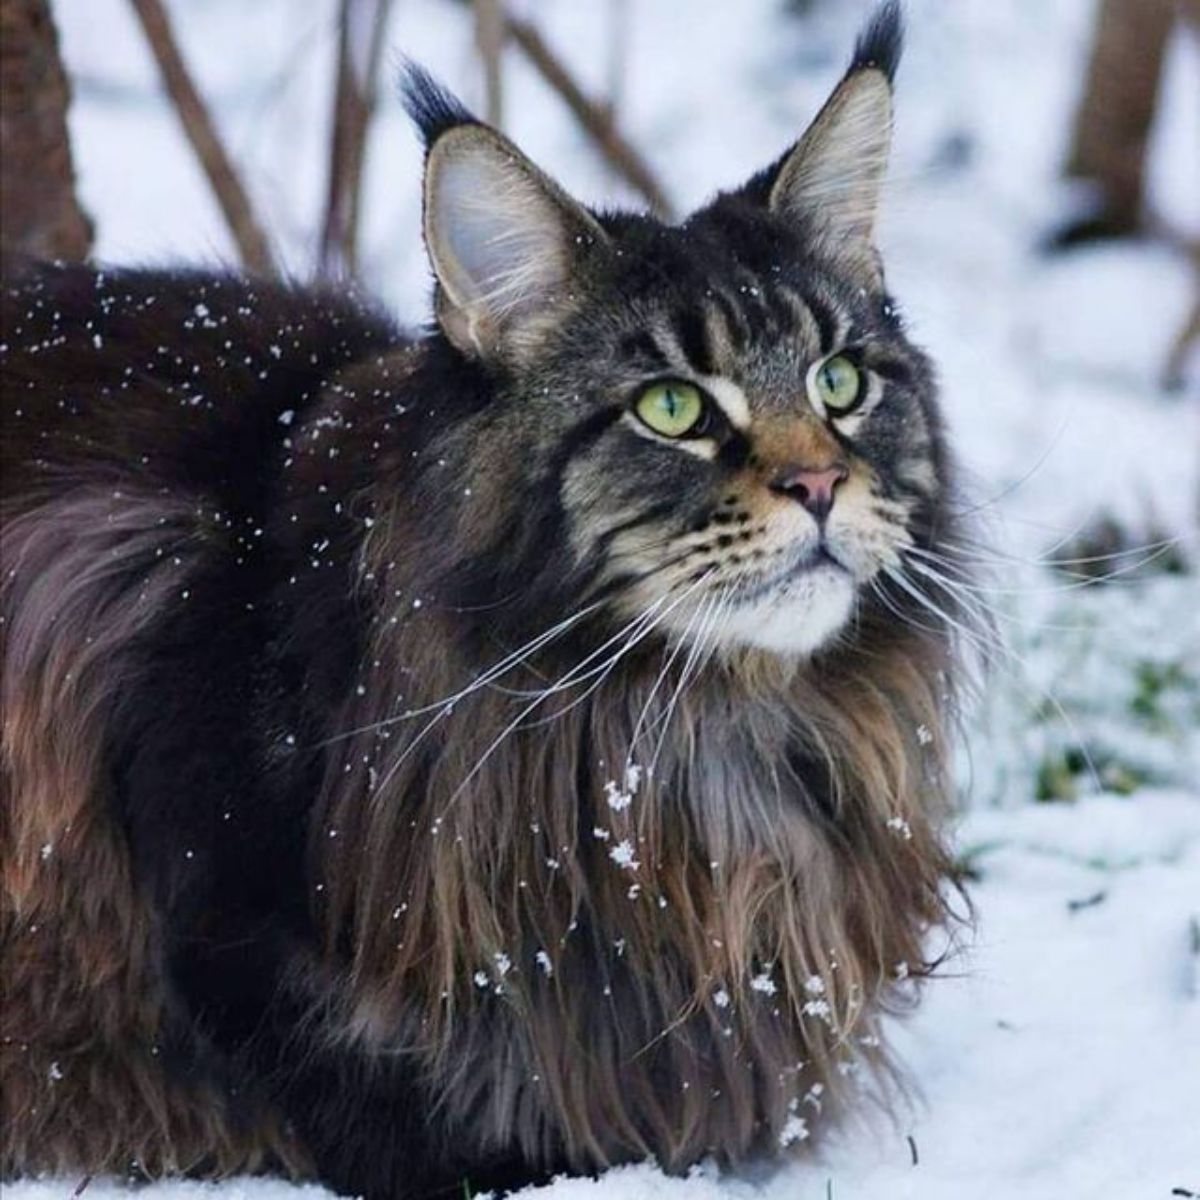 A fluffy calico maine coon standing in the snow.